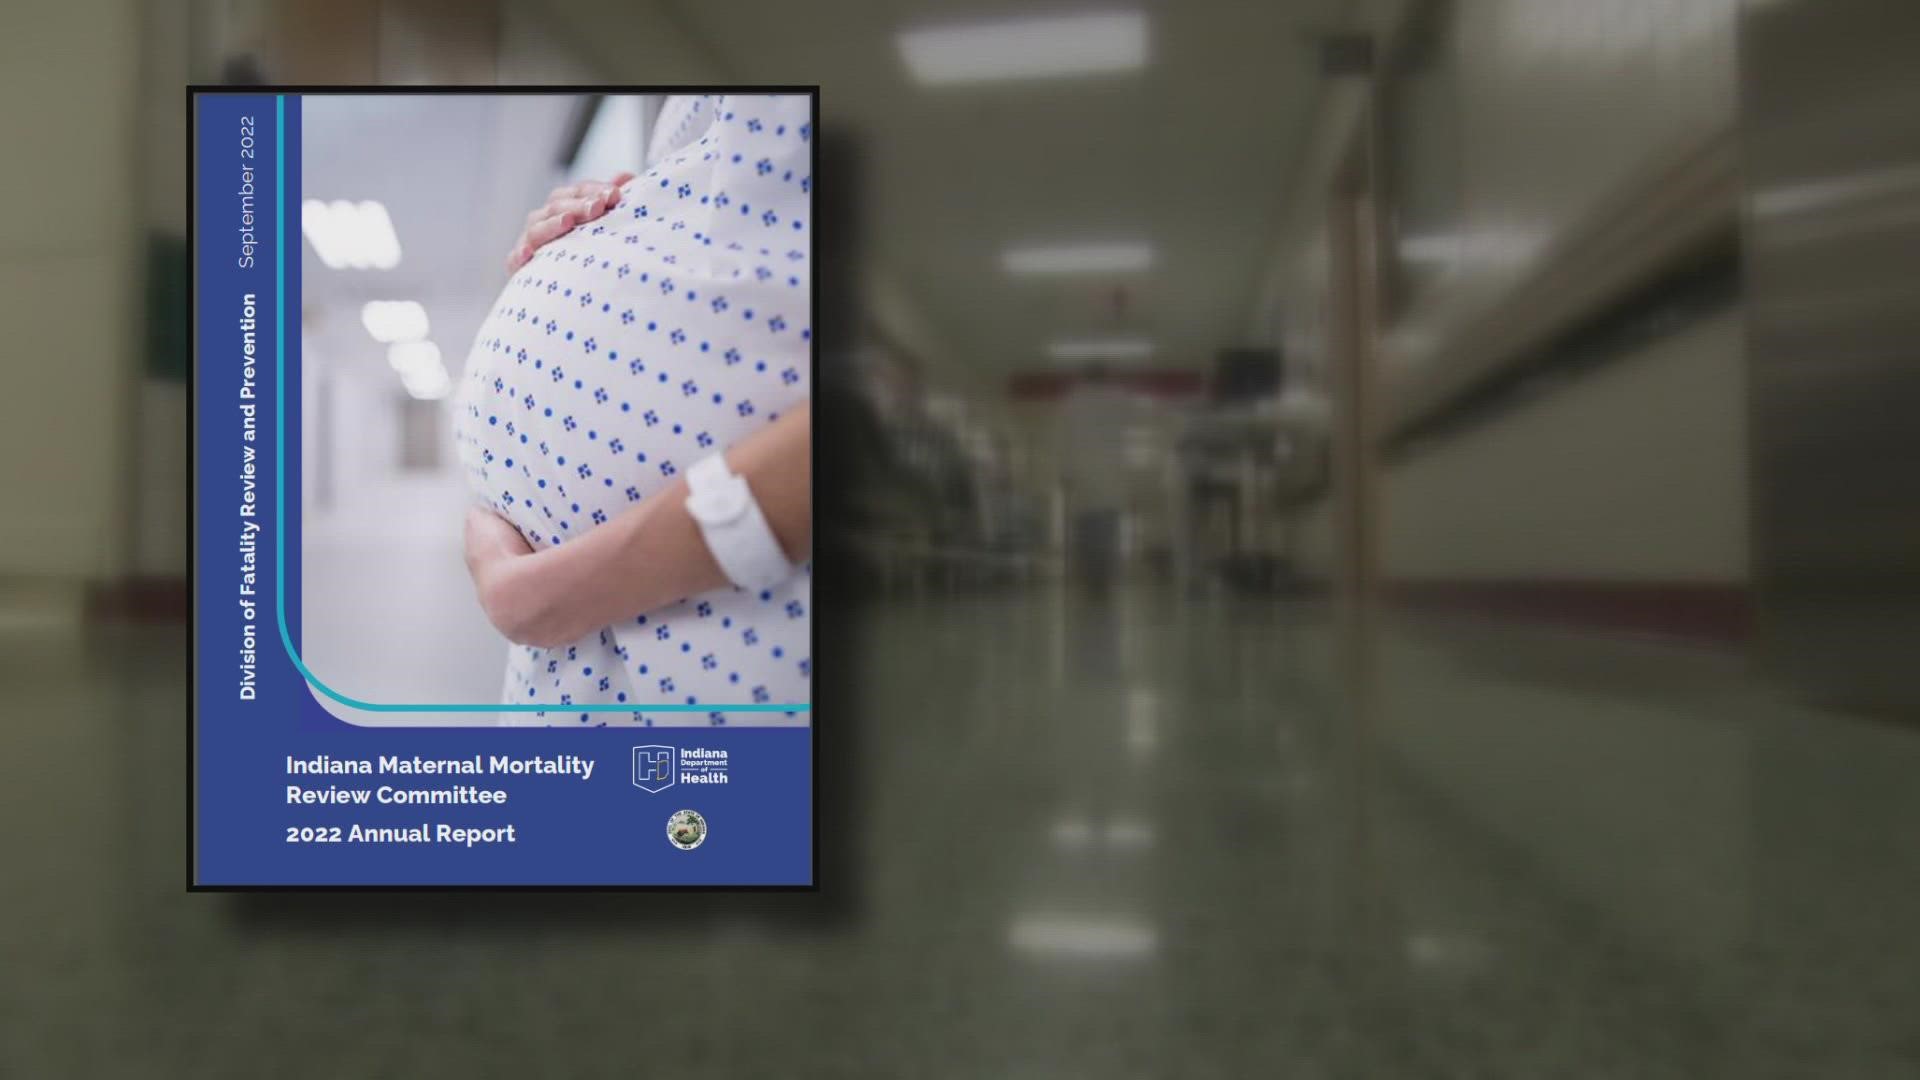 The report found a more than 40% increase in pregnancy-associated deaths in Hoosier women in 2020, compared to 2019.